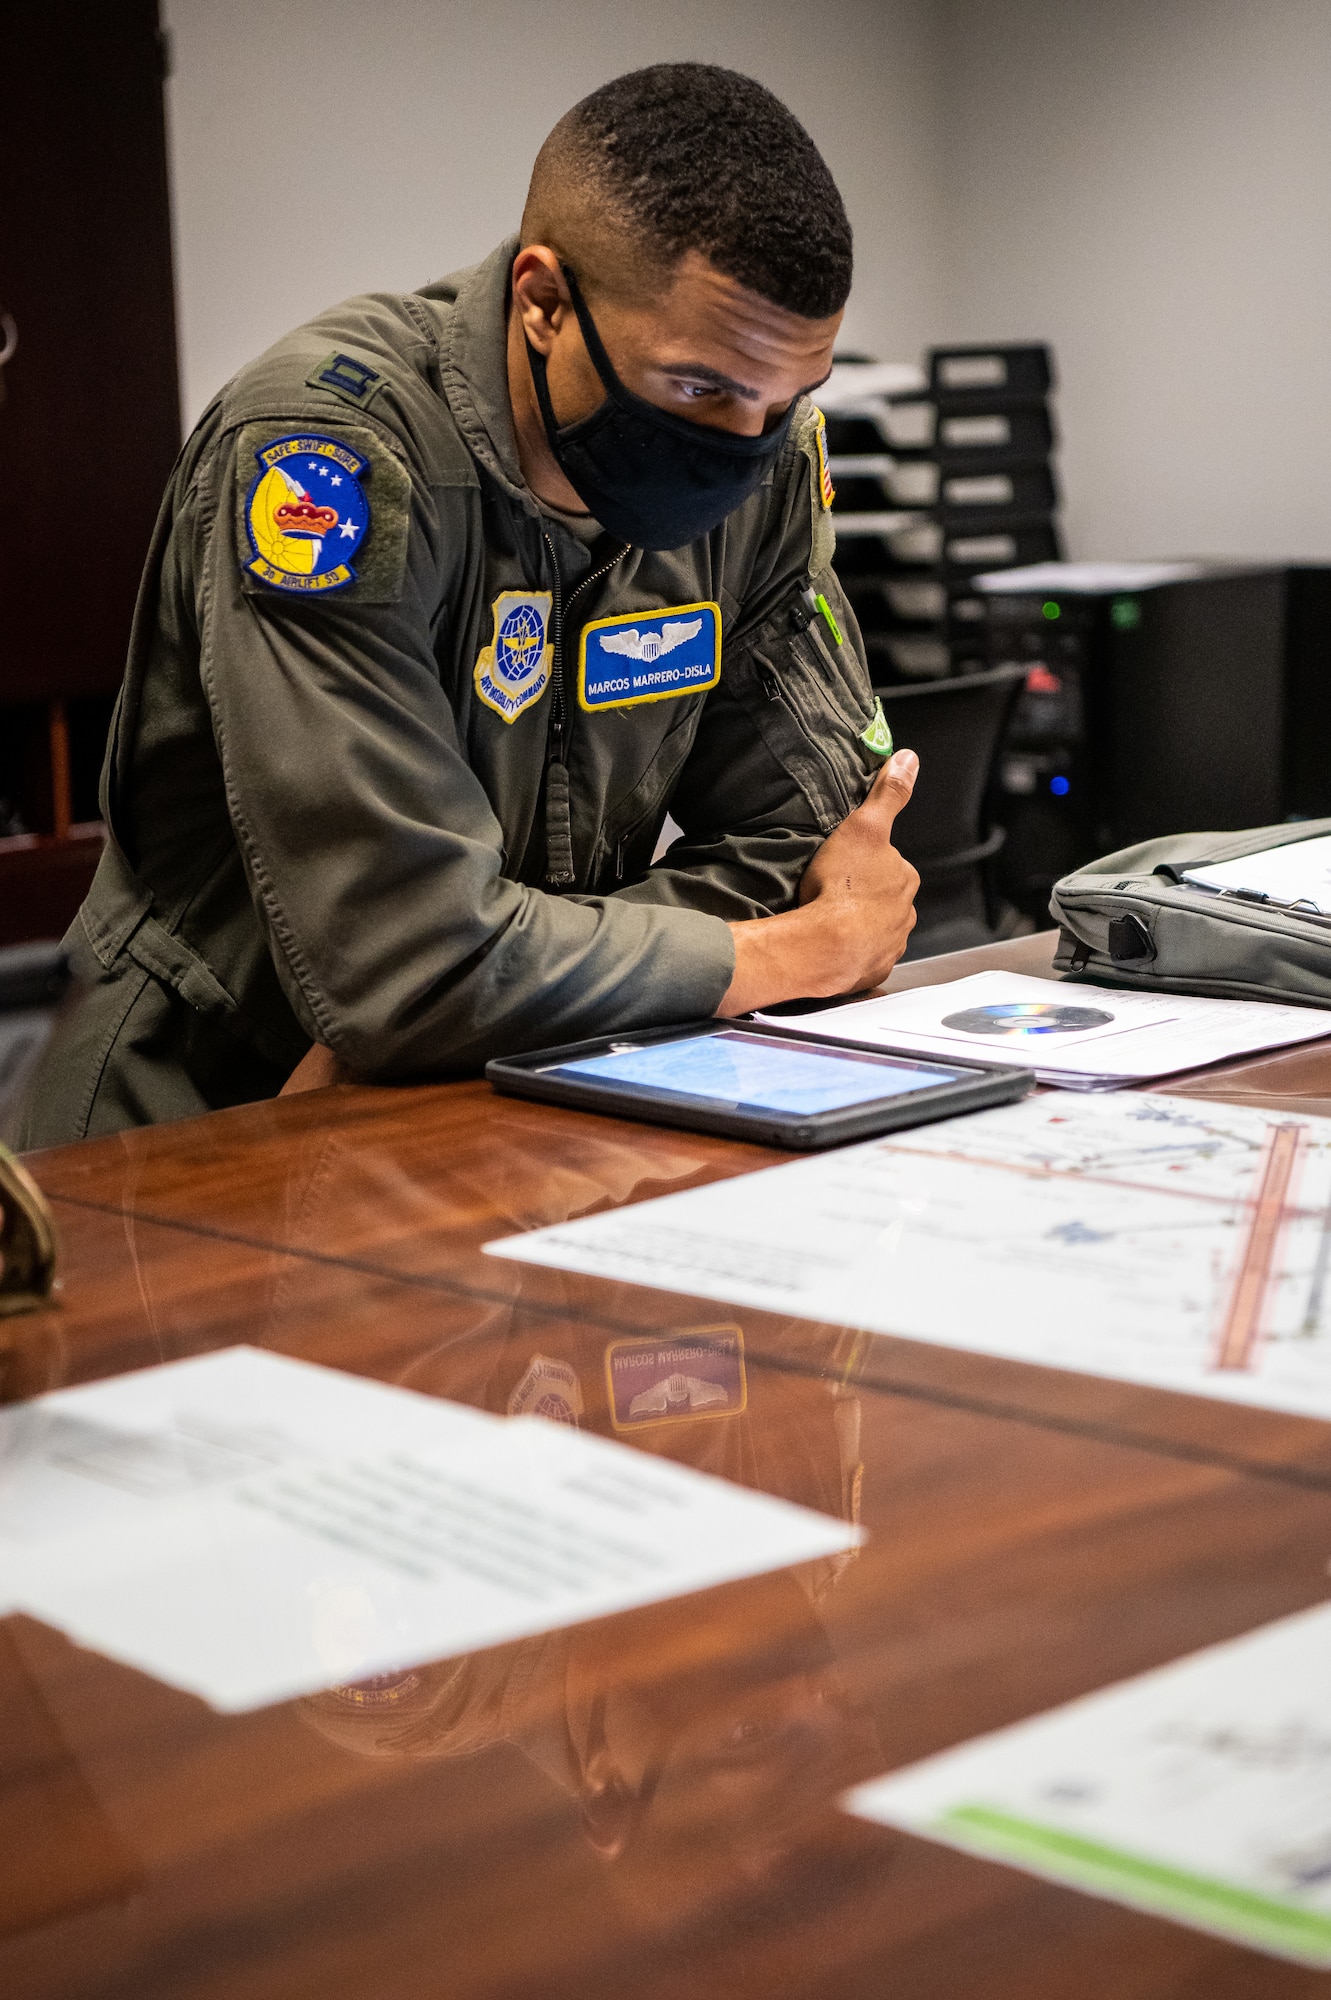 U.S. Air Force Capt. Marcos Marrero-Disla, 3rd Airlift Squadron pilot, examines documents during a preflight brief at Dover Air Force Base, Delaware, March 23, 2021. A preflight brief allows aircrew members to communicate important information to one another ensuring they understand safety procedures and mission plans. (U.S. Air Force photo by Senior Airman Christopher Quail)